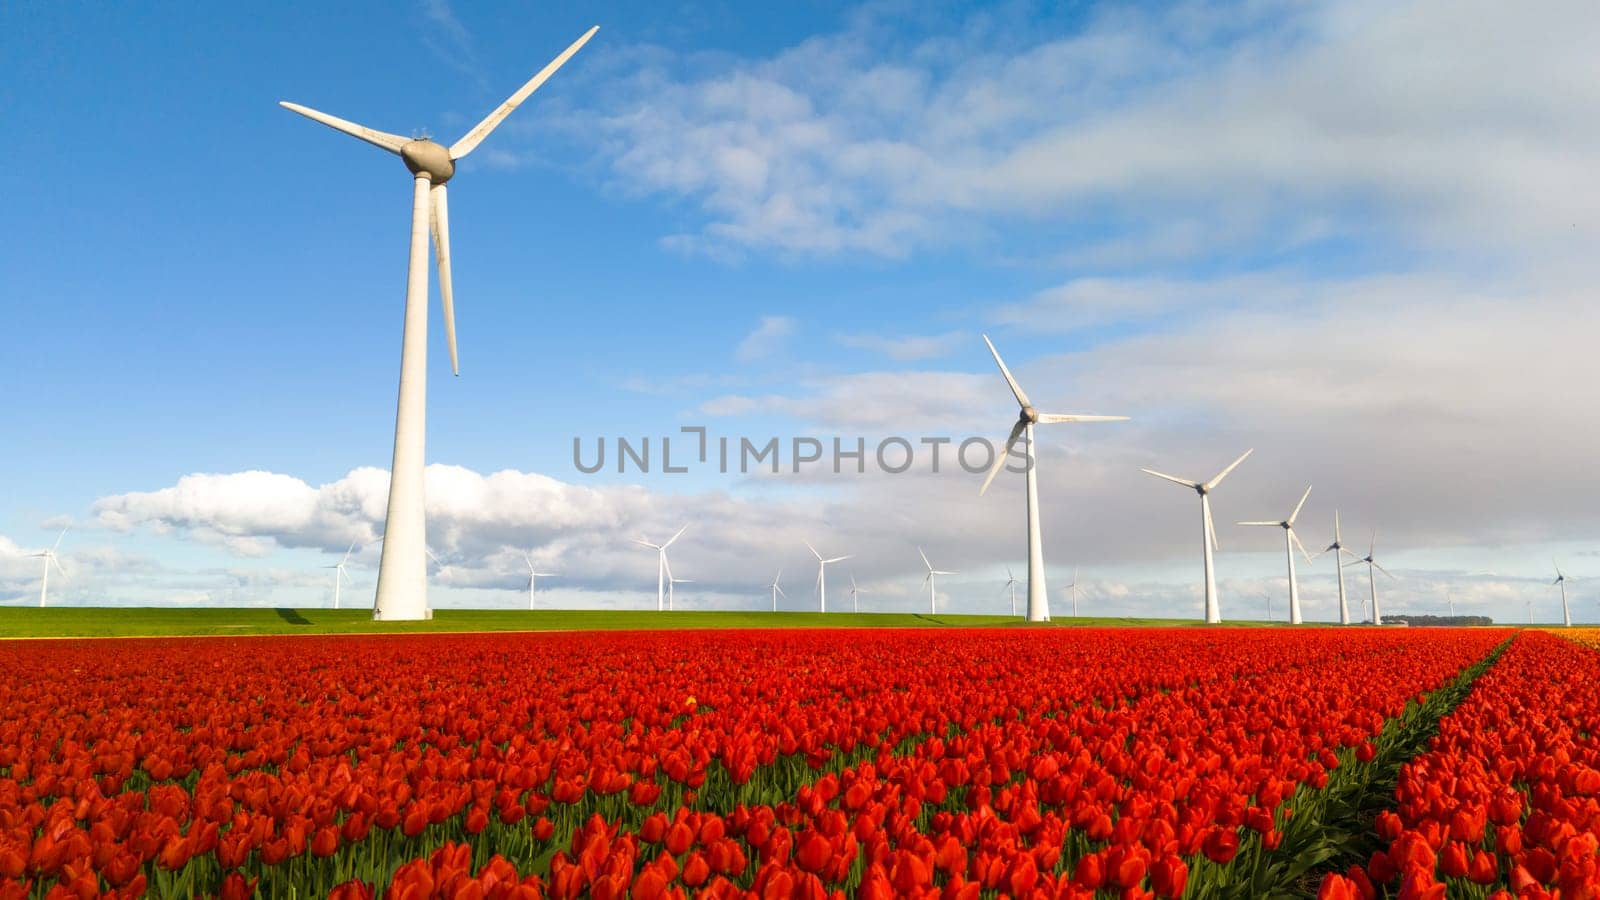 A vibrant field of red tulips dances in the wind, with traditional windmills spinning gracefully in the background by fokkebok